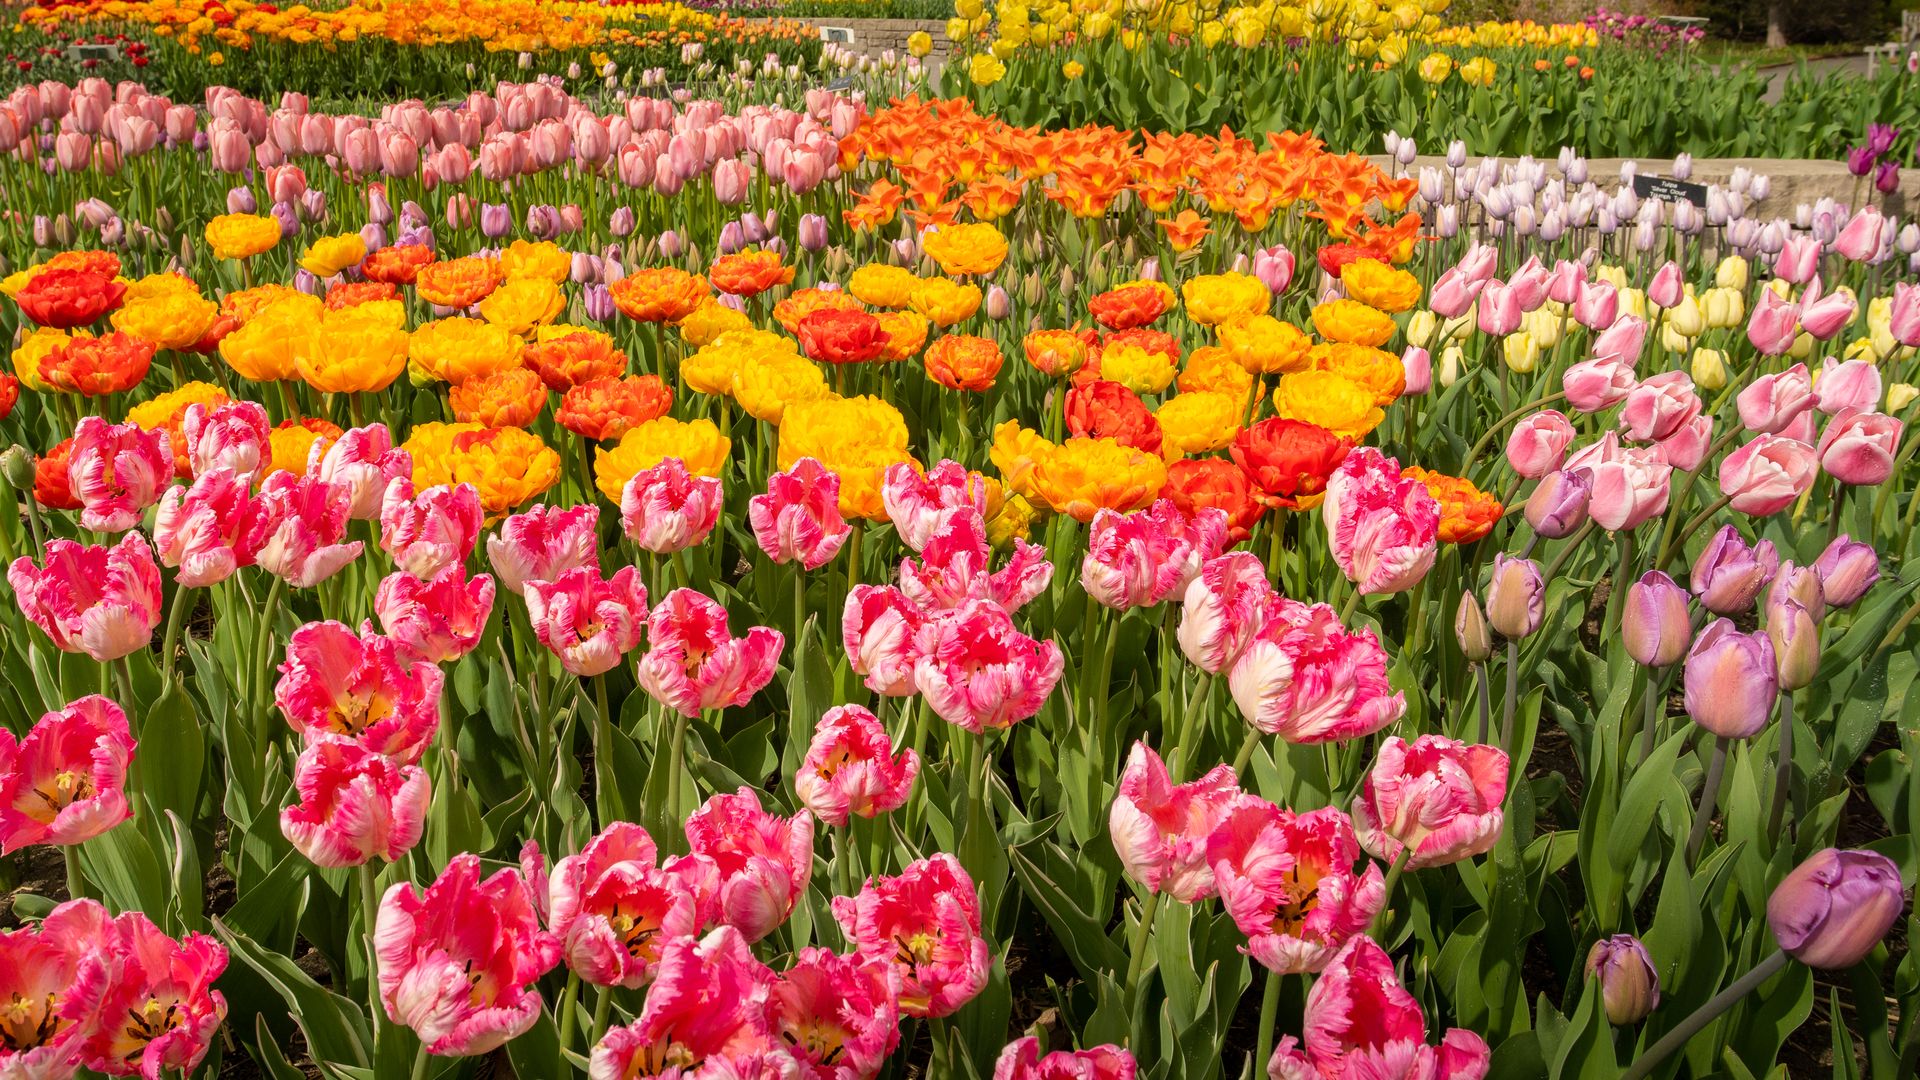 A blooming field of tulips